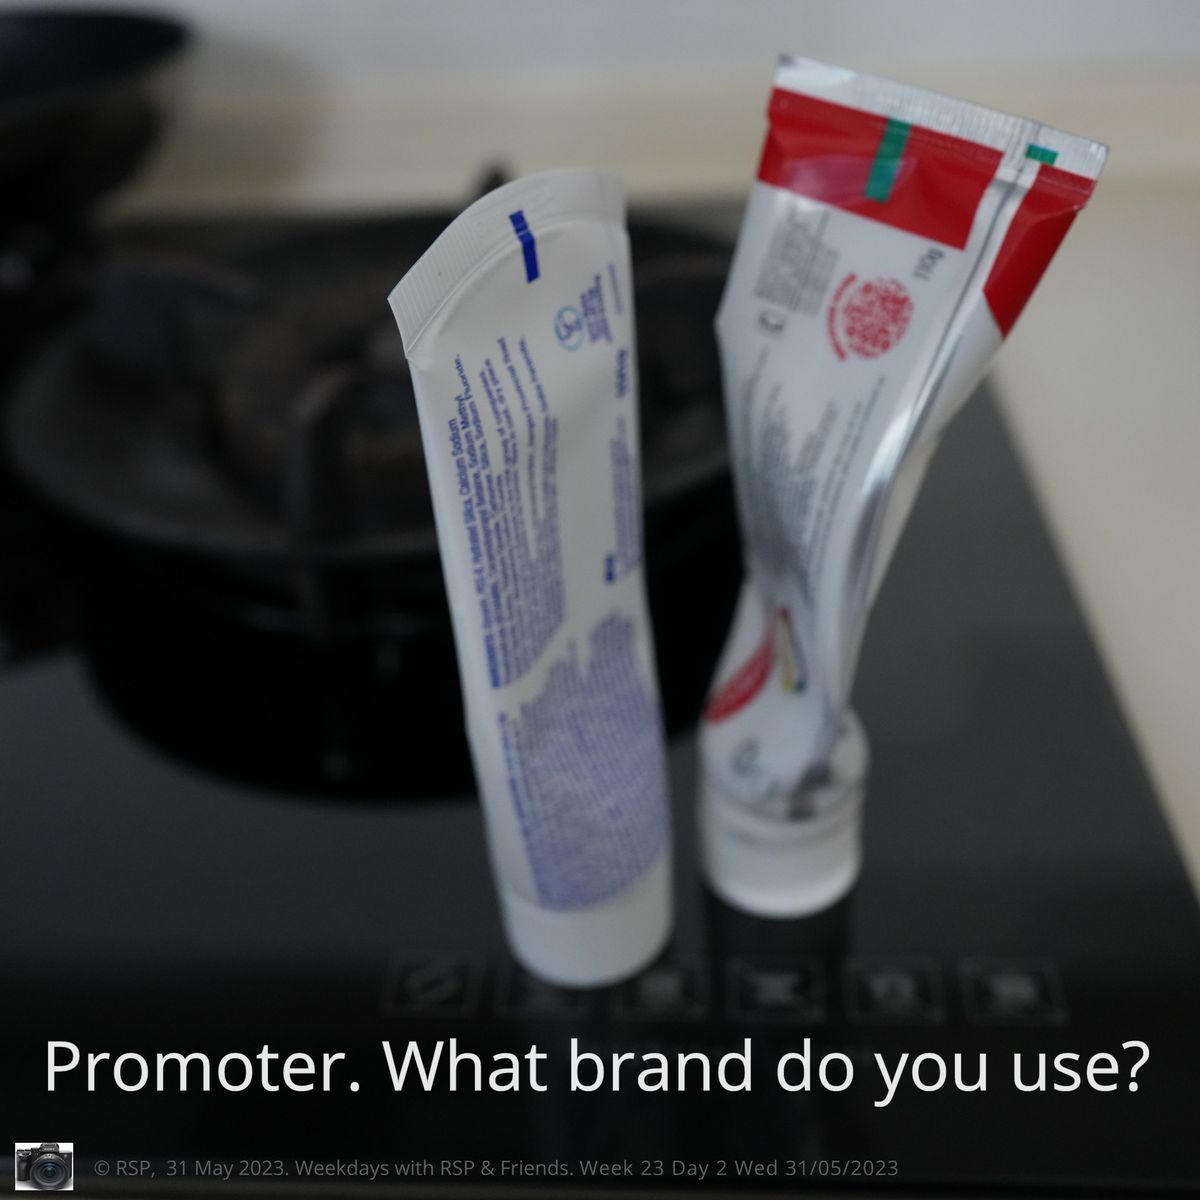 QT: Promoter. What brand do you use?